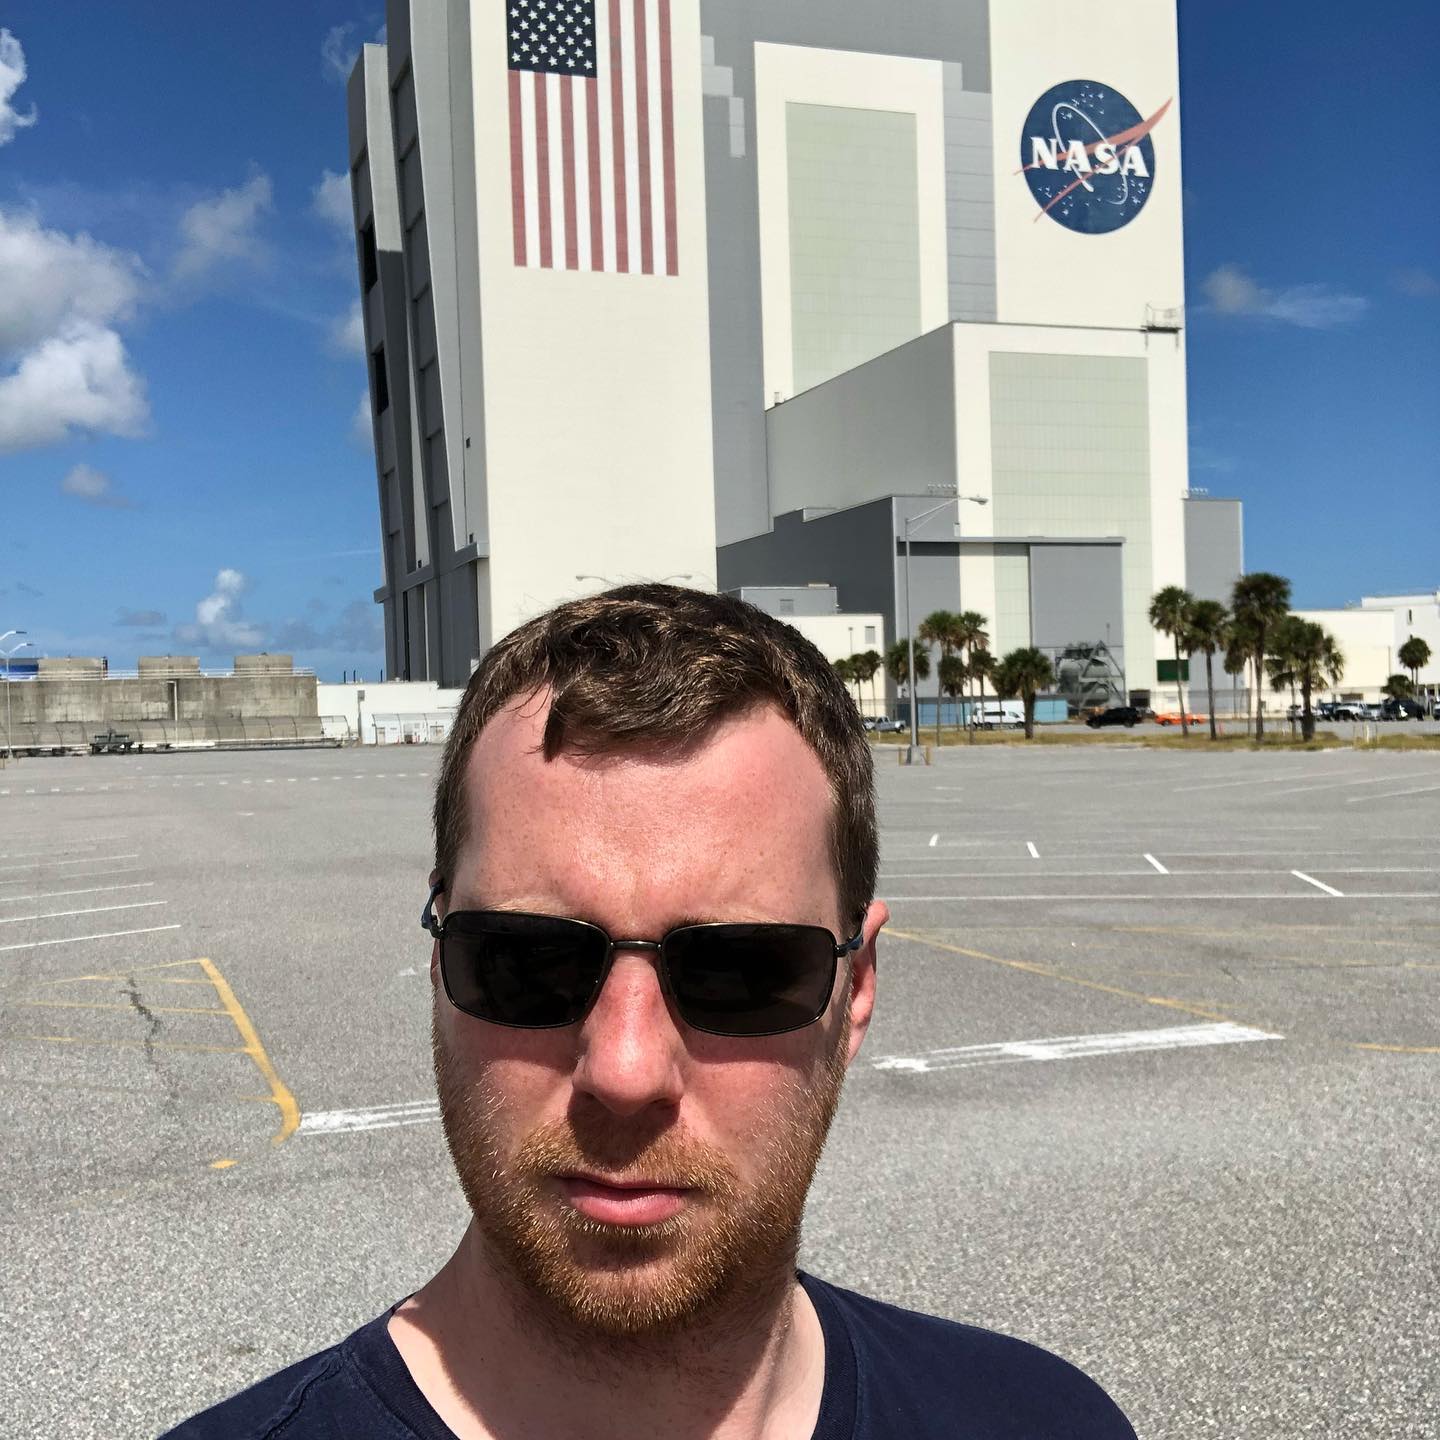 Charlie Gough Stood outside of the Kennedy space center